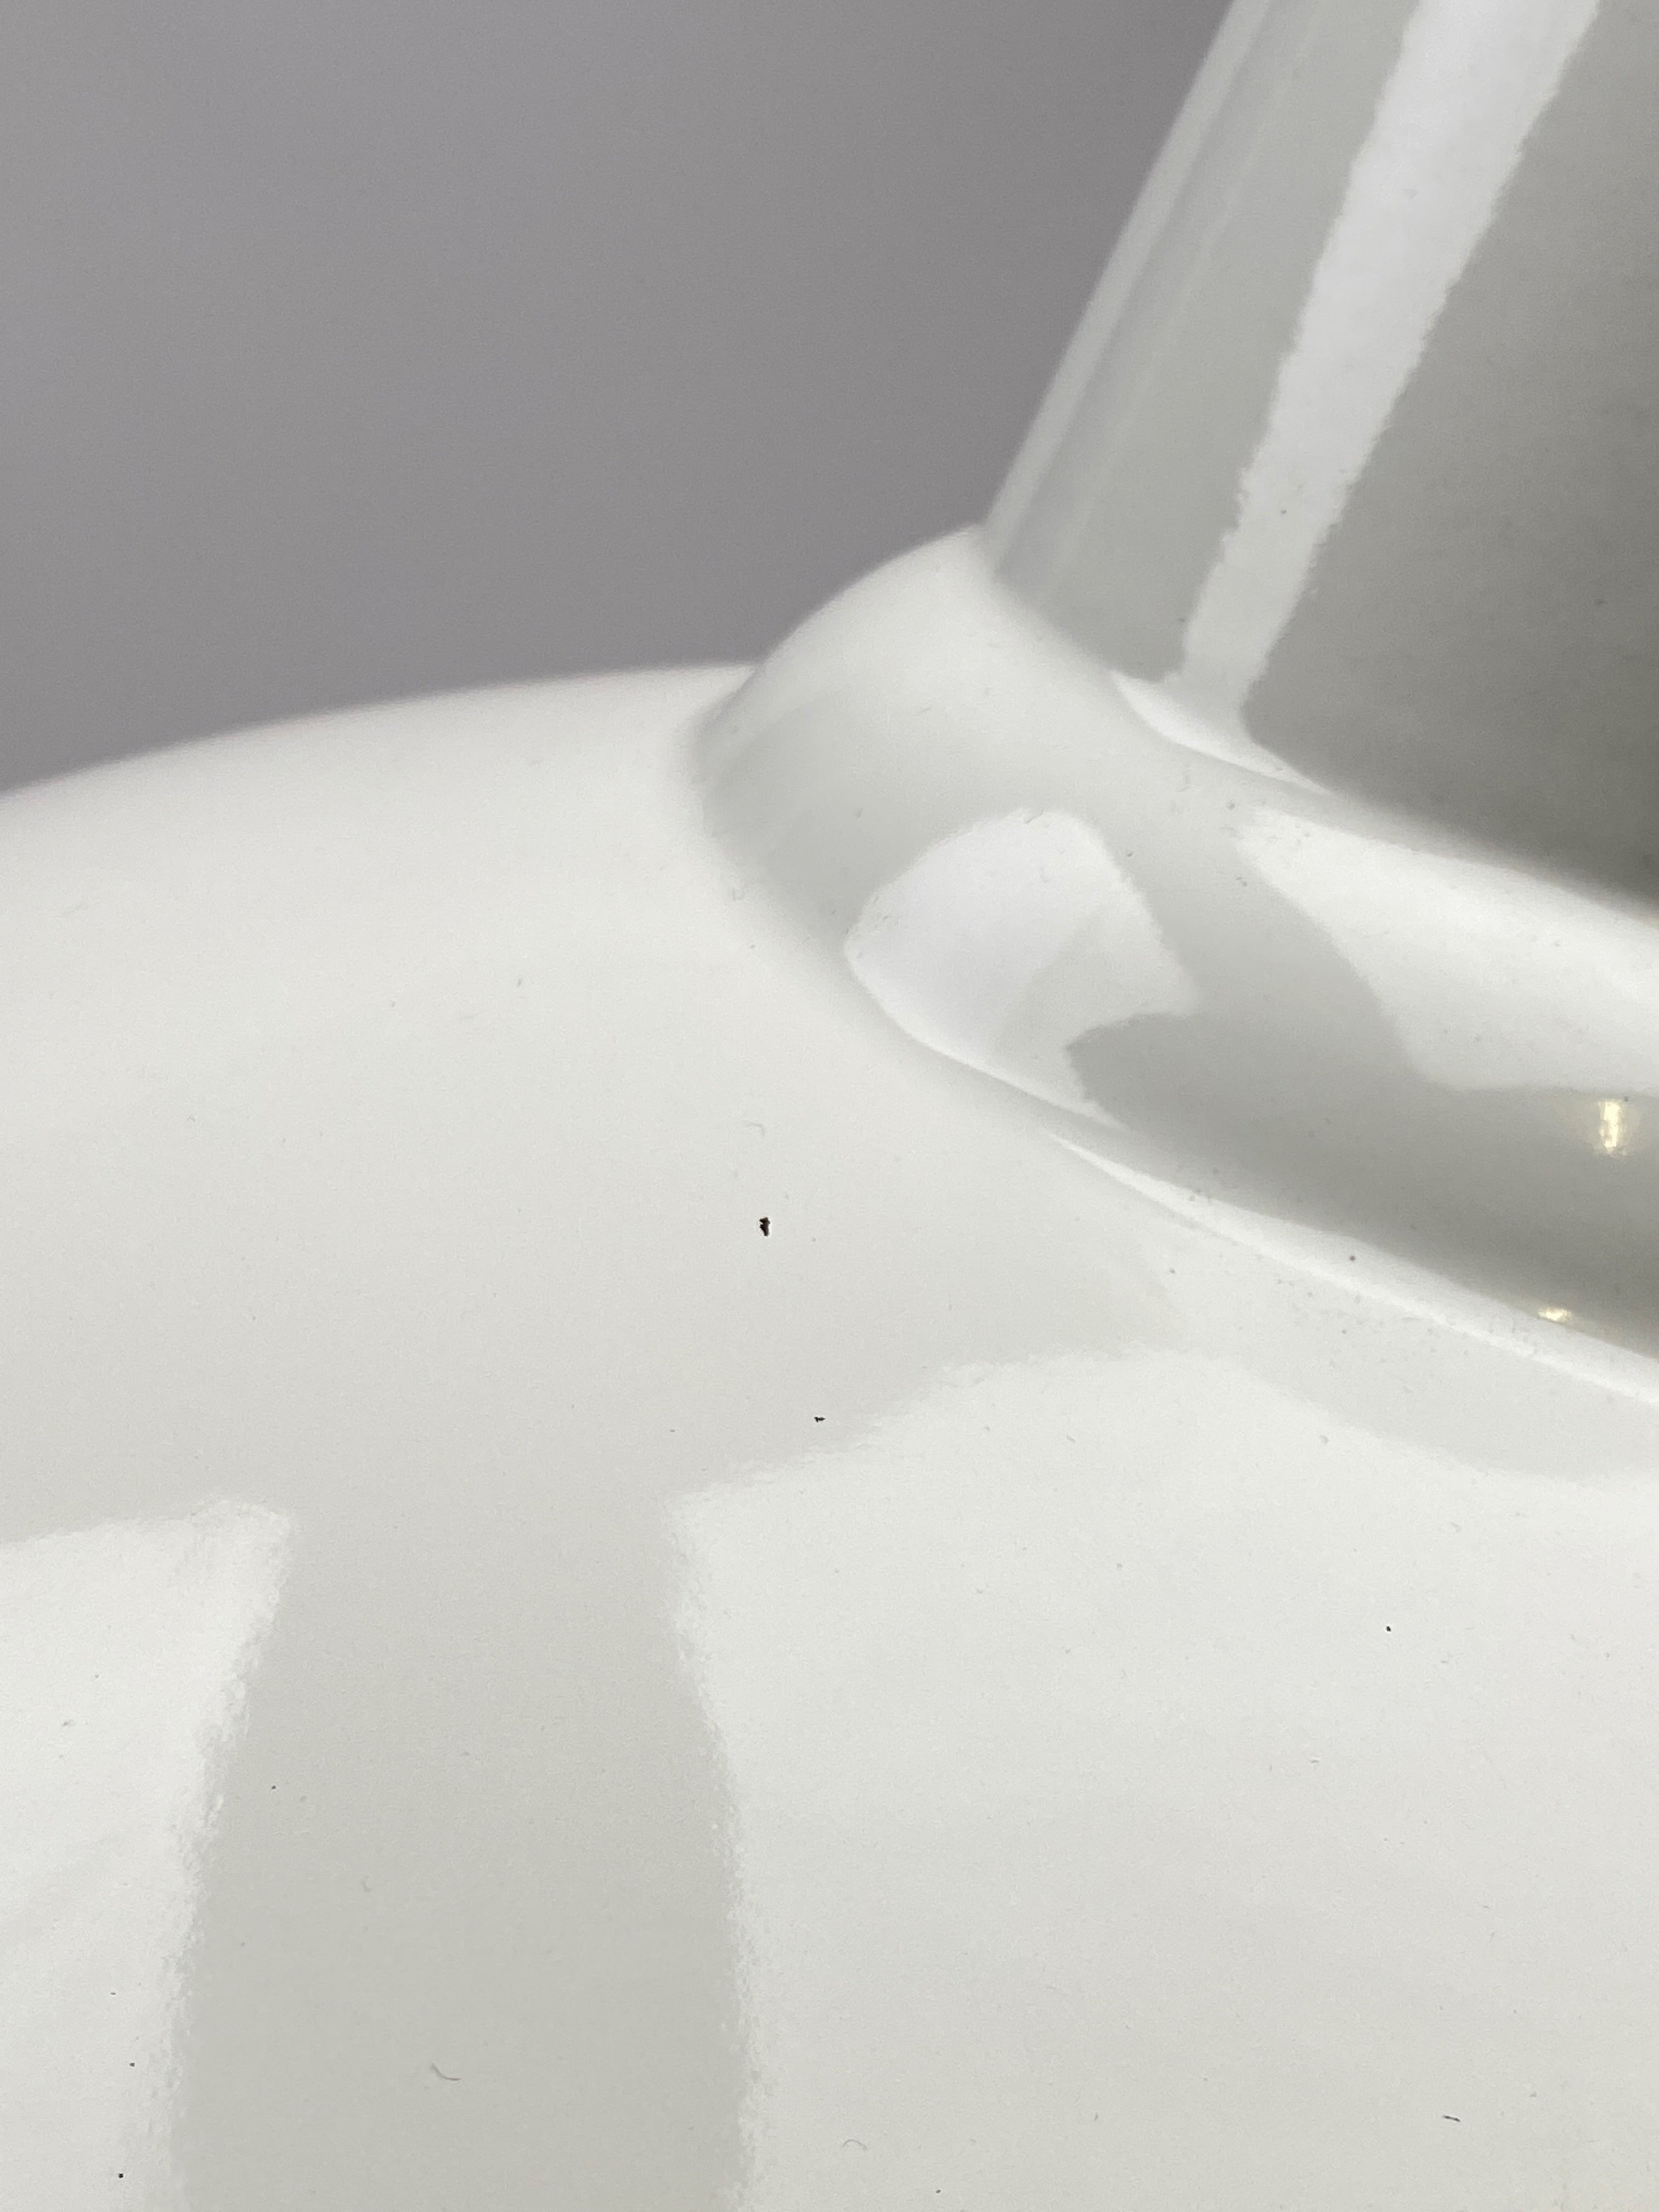 Example of Grade B damage that may be visible on a Worn Lighting Shade. Image shows minor chips/marks to the enamel finish of a white shade.